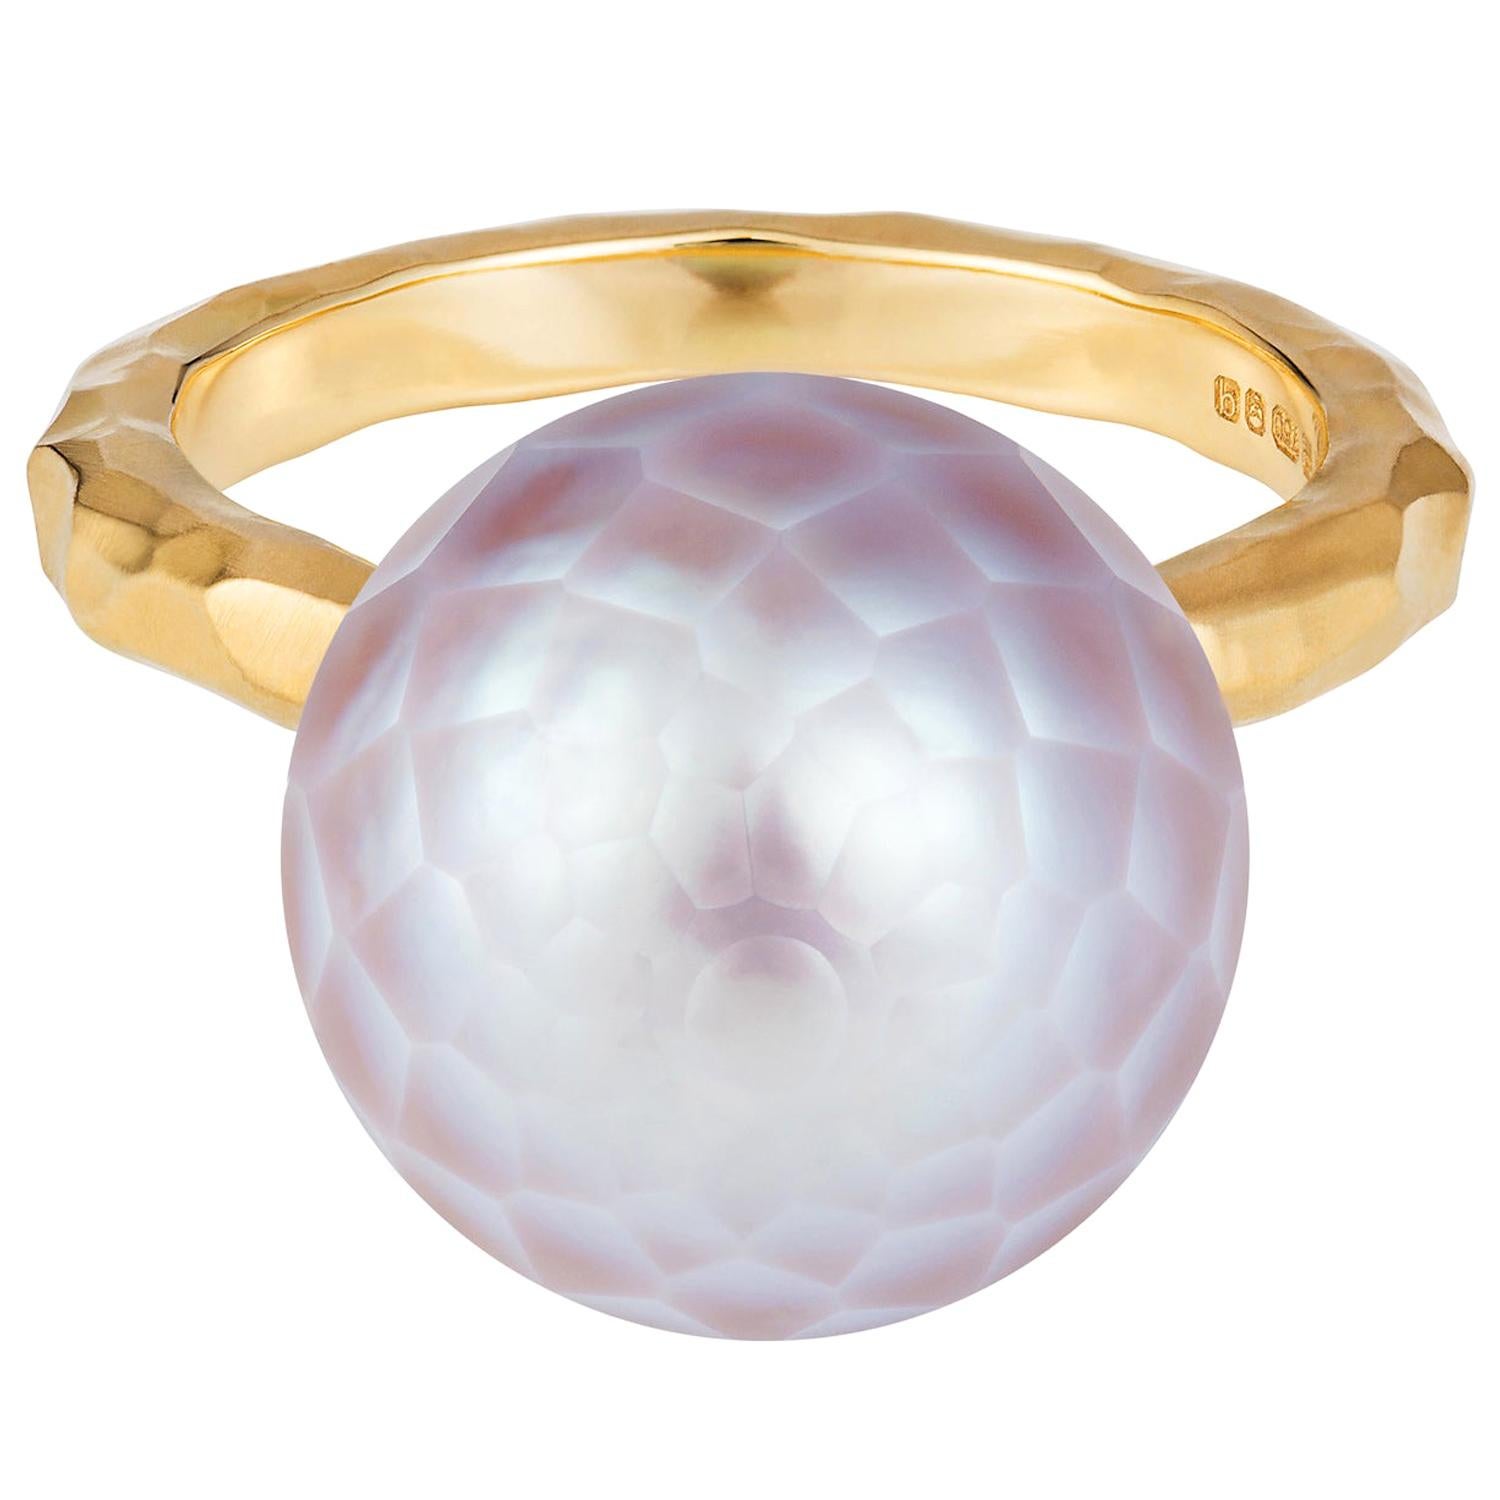 18 Karat Yellow Gold Hammered Band Ring with Pink-Grey Faceted Pearl For Sale